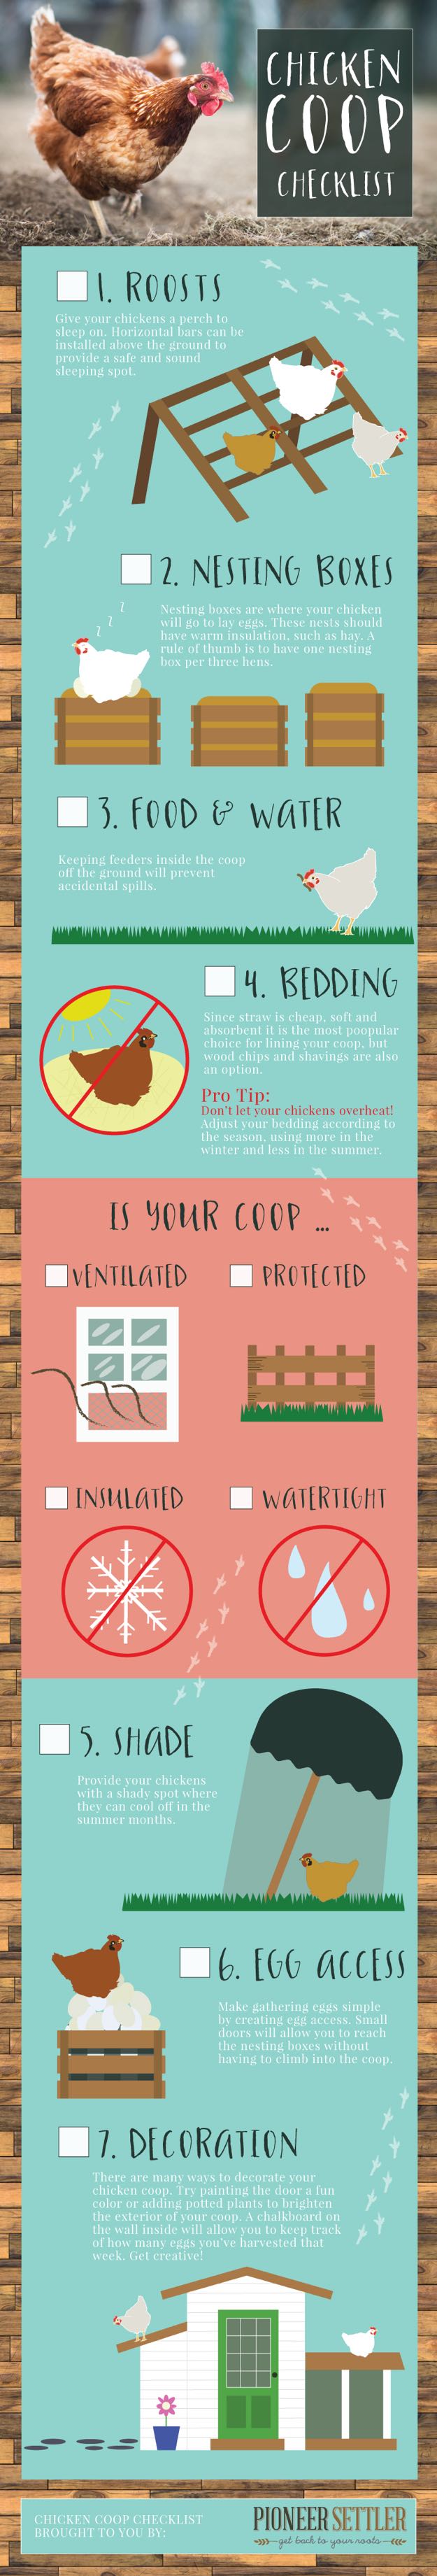 The Chicken Coop Checklist: Additional Tips and Advice | How to Build A Chicken Coop in 4 Easy Steps